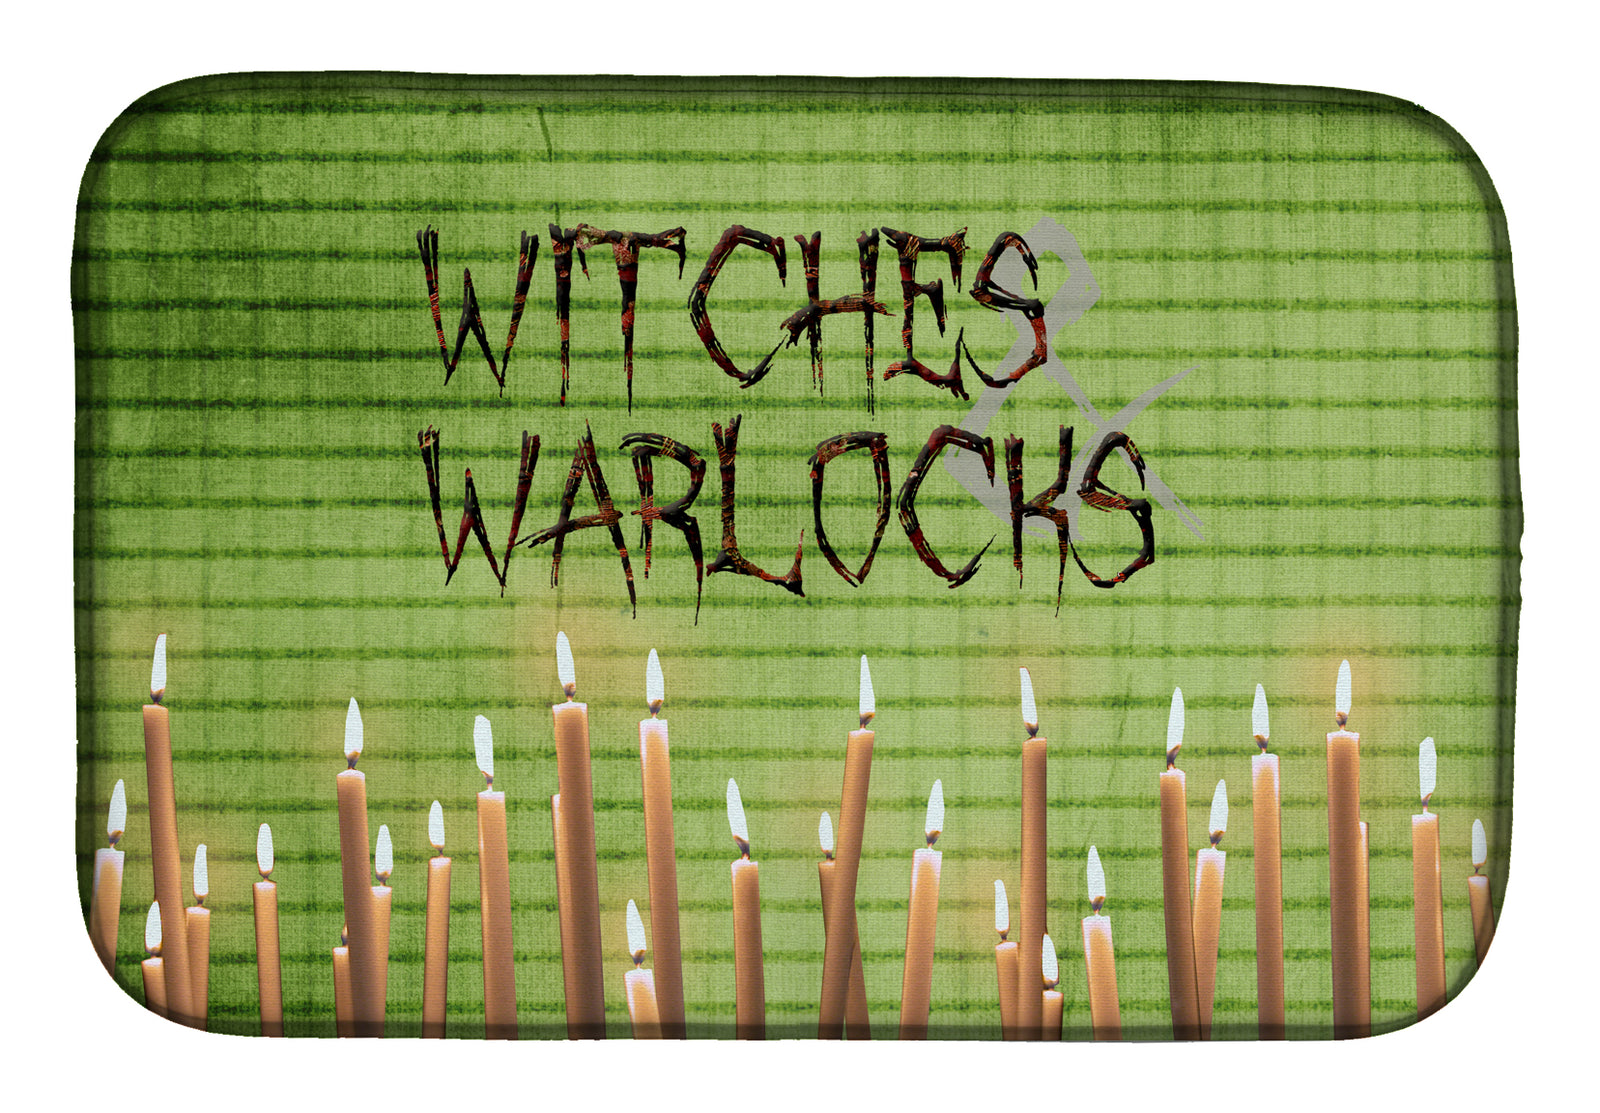 Witches and Warlocks Halloween Dish Drying Mat SB3011DDM